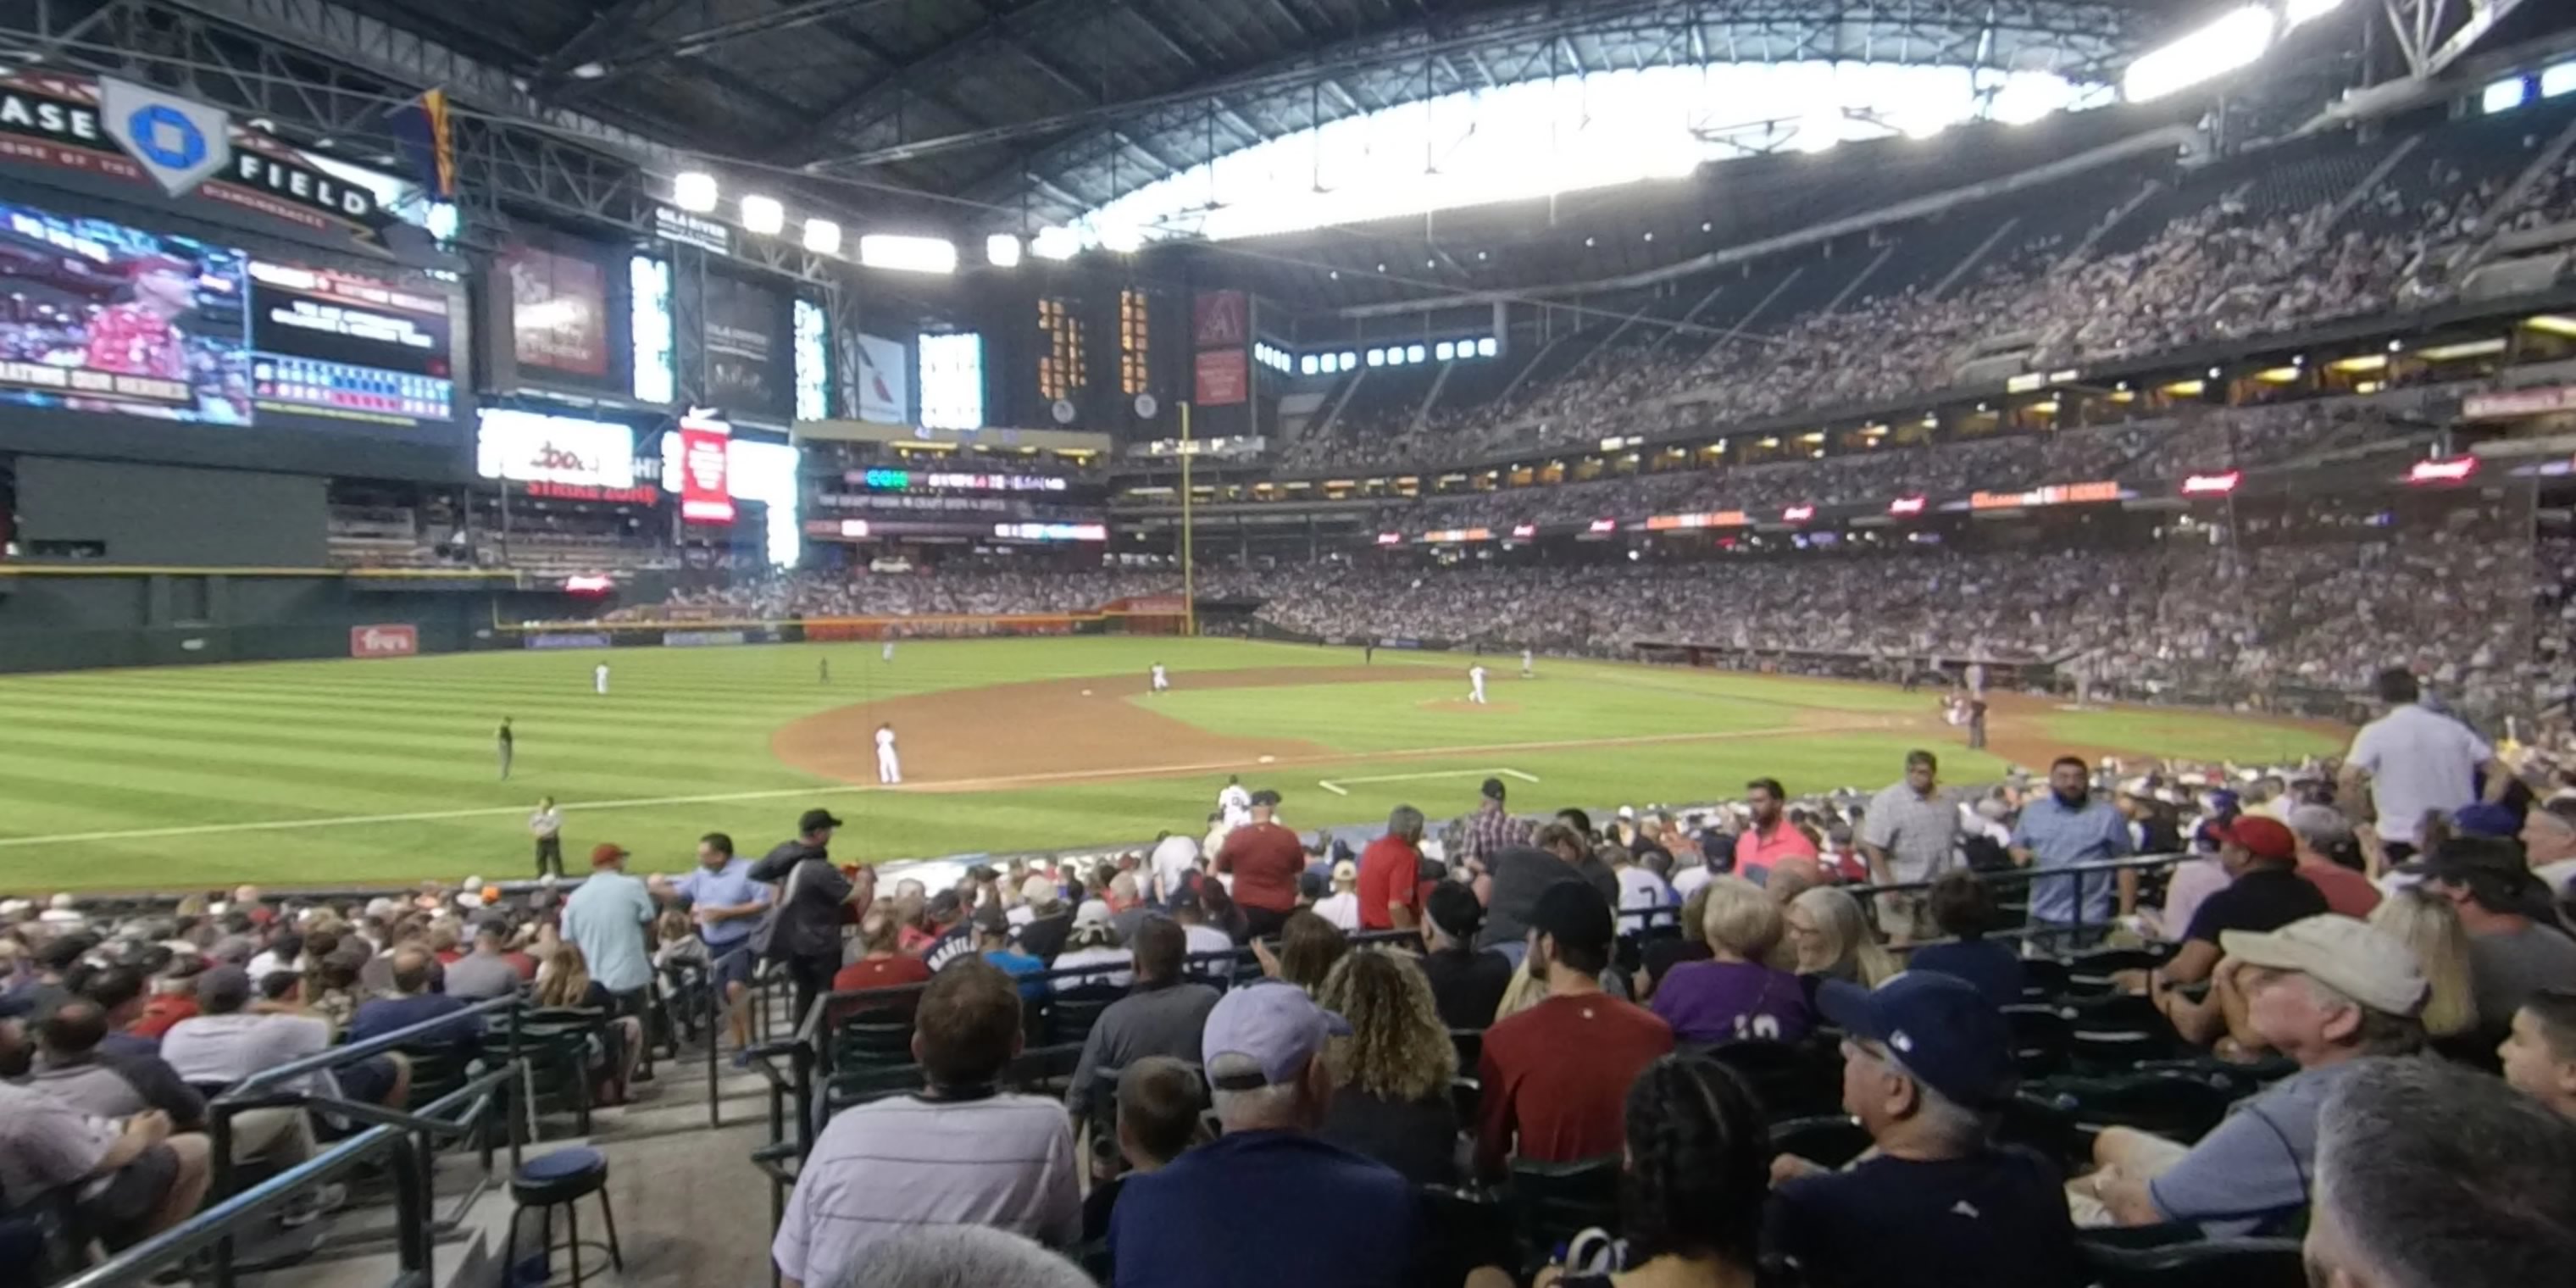 section 129 panoramic seat view  for baseball - chase field